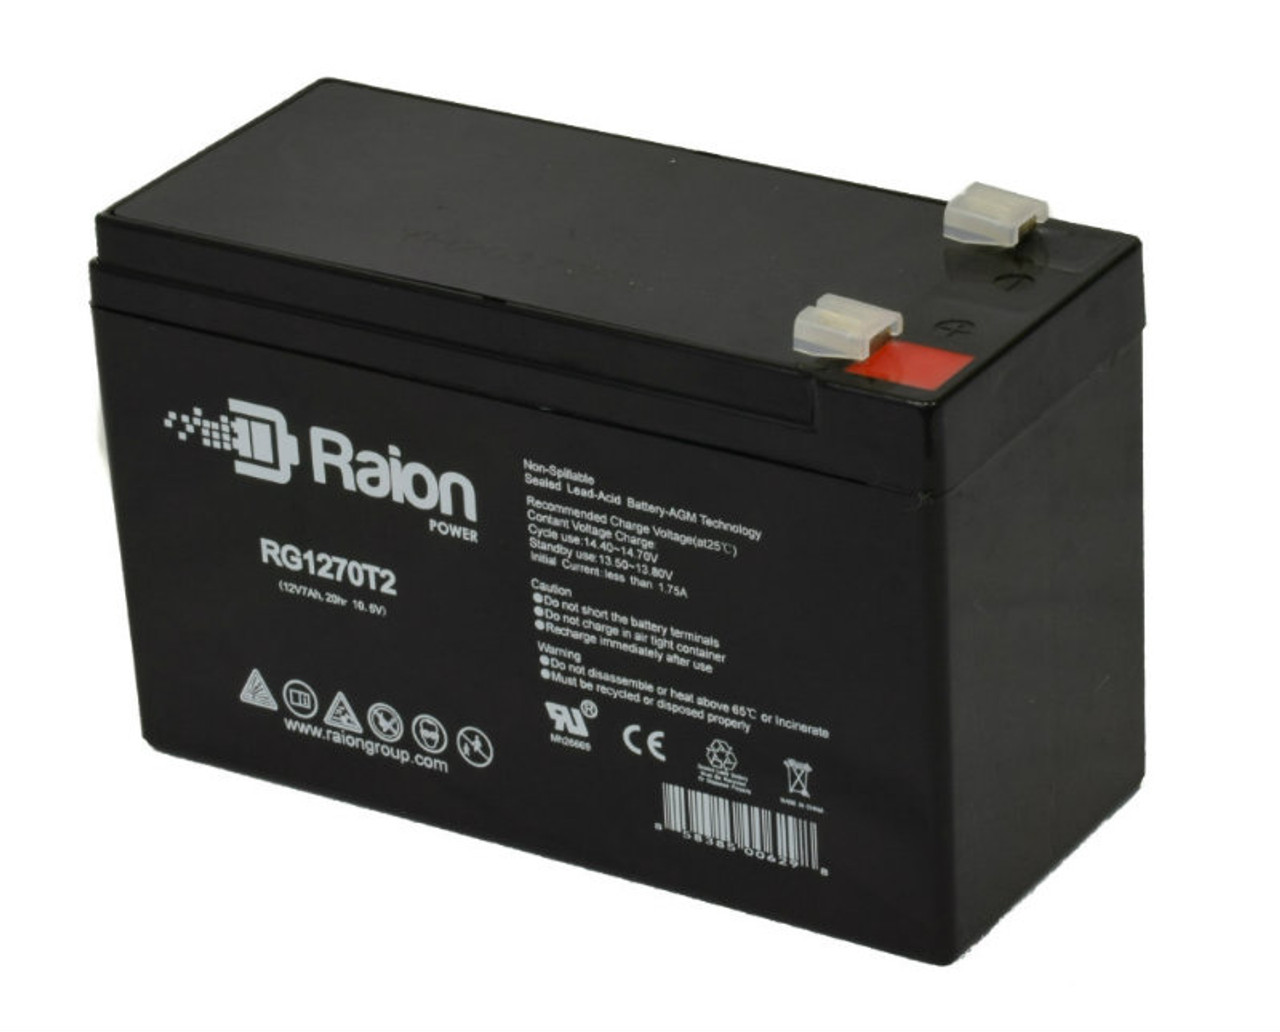 Raion Power RG1270T2 12V 7Ah Rechargeable Battery for Narada 6-FM-7.2